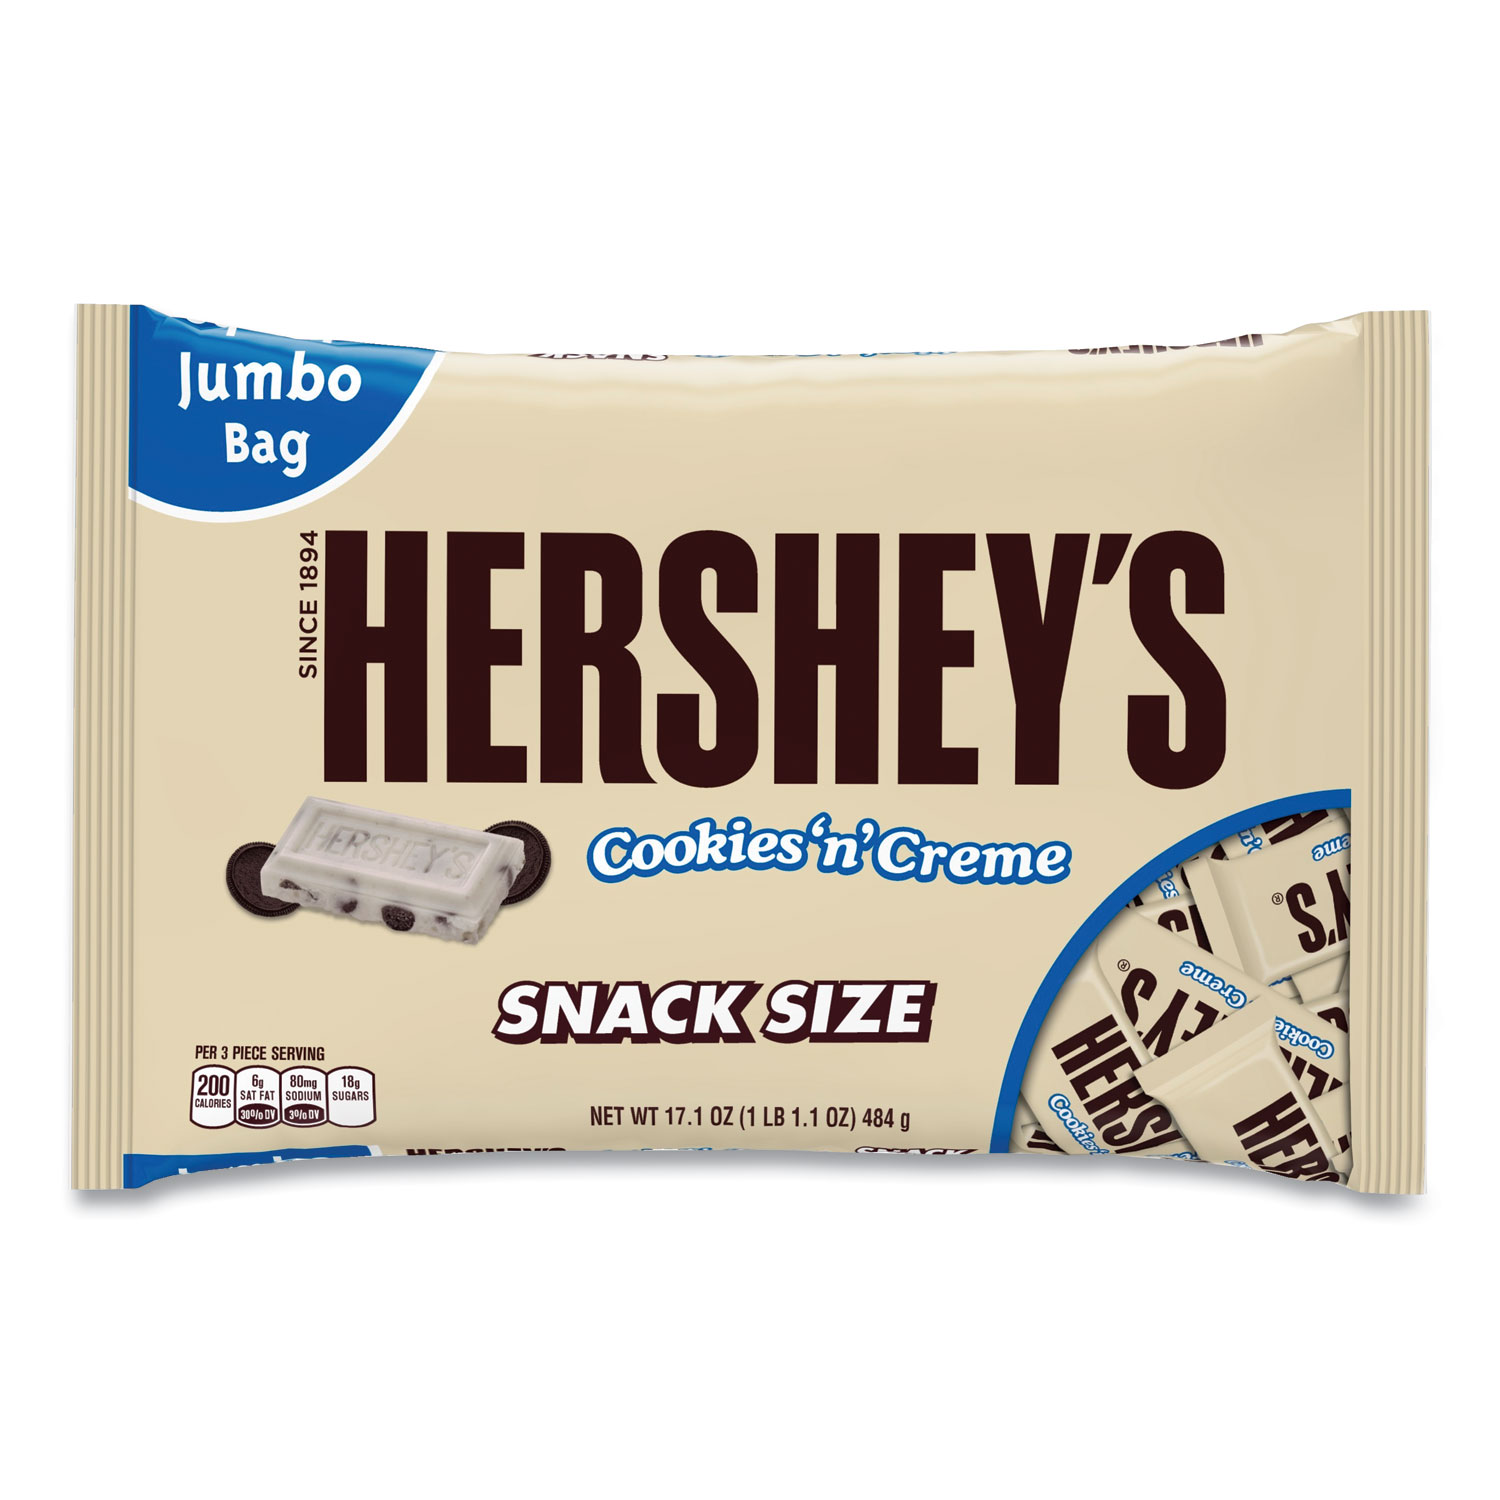  Hershey's 7061 Snack Size Bars, Cookies n Creme, 17.1 oz Bag, 2/Pack, Free Delivery in 1-4 Business Days (GRR24600029) 